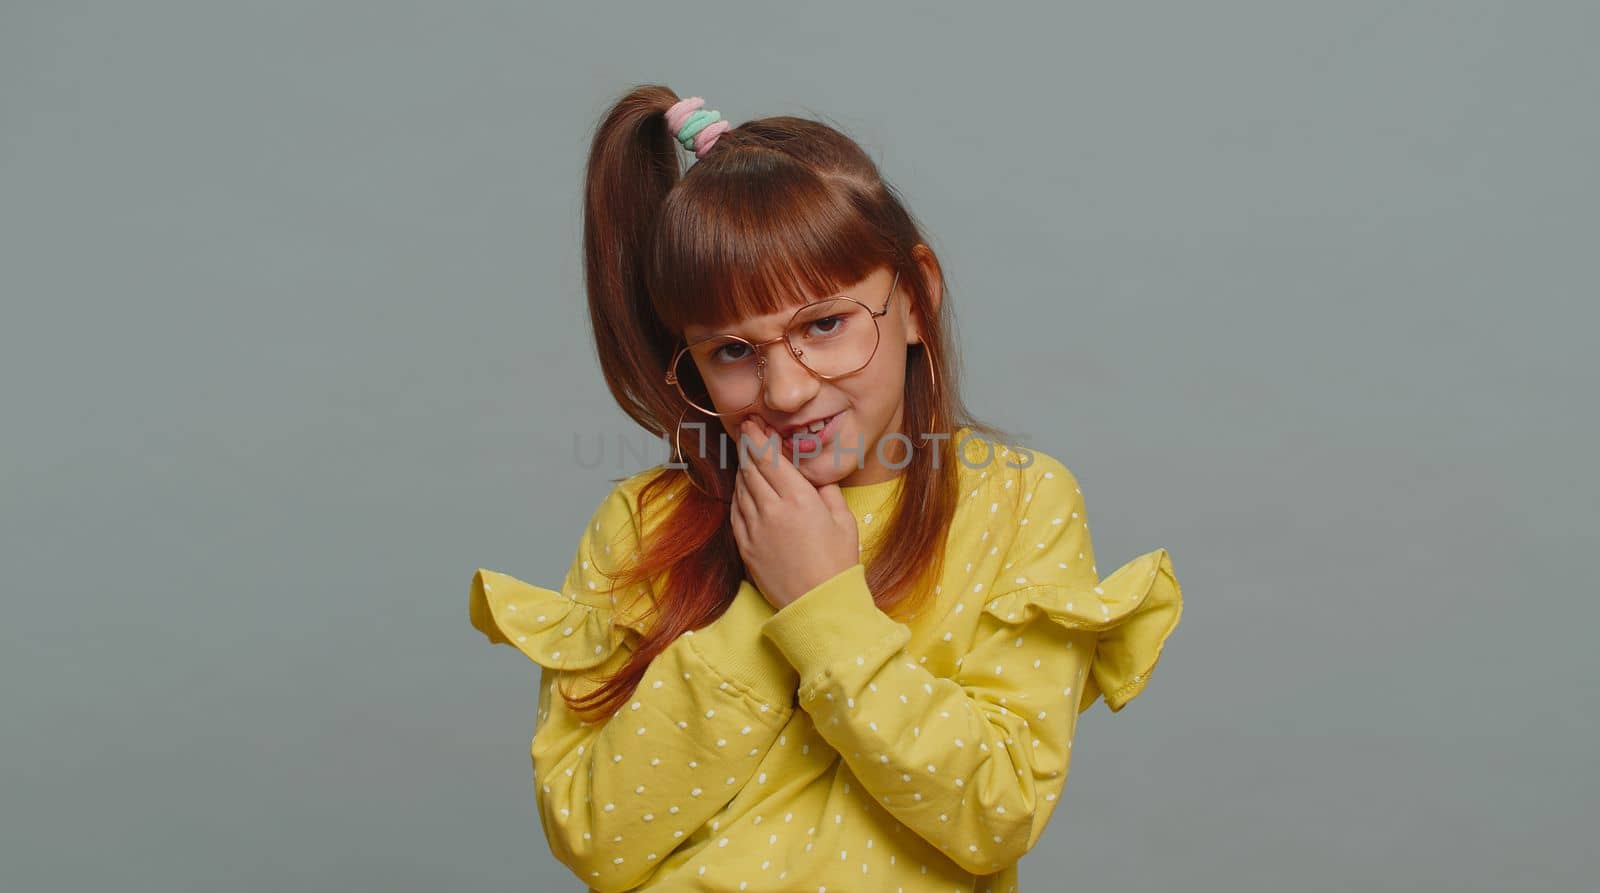 Dental problems. Young preteen child girl kid touching cheek, closing eyes with expression of terrible suffer from painful toothache, sensitive teeth, cavities. Toddler children on gray background